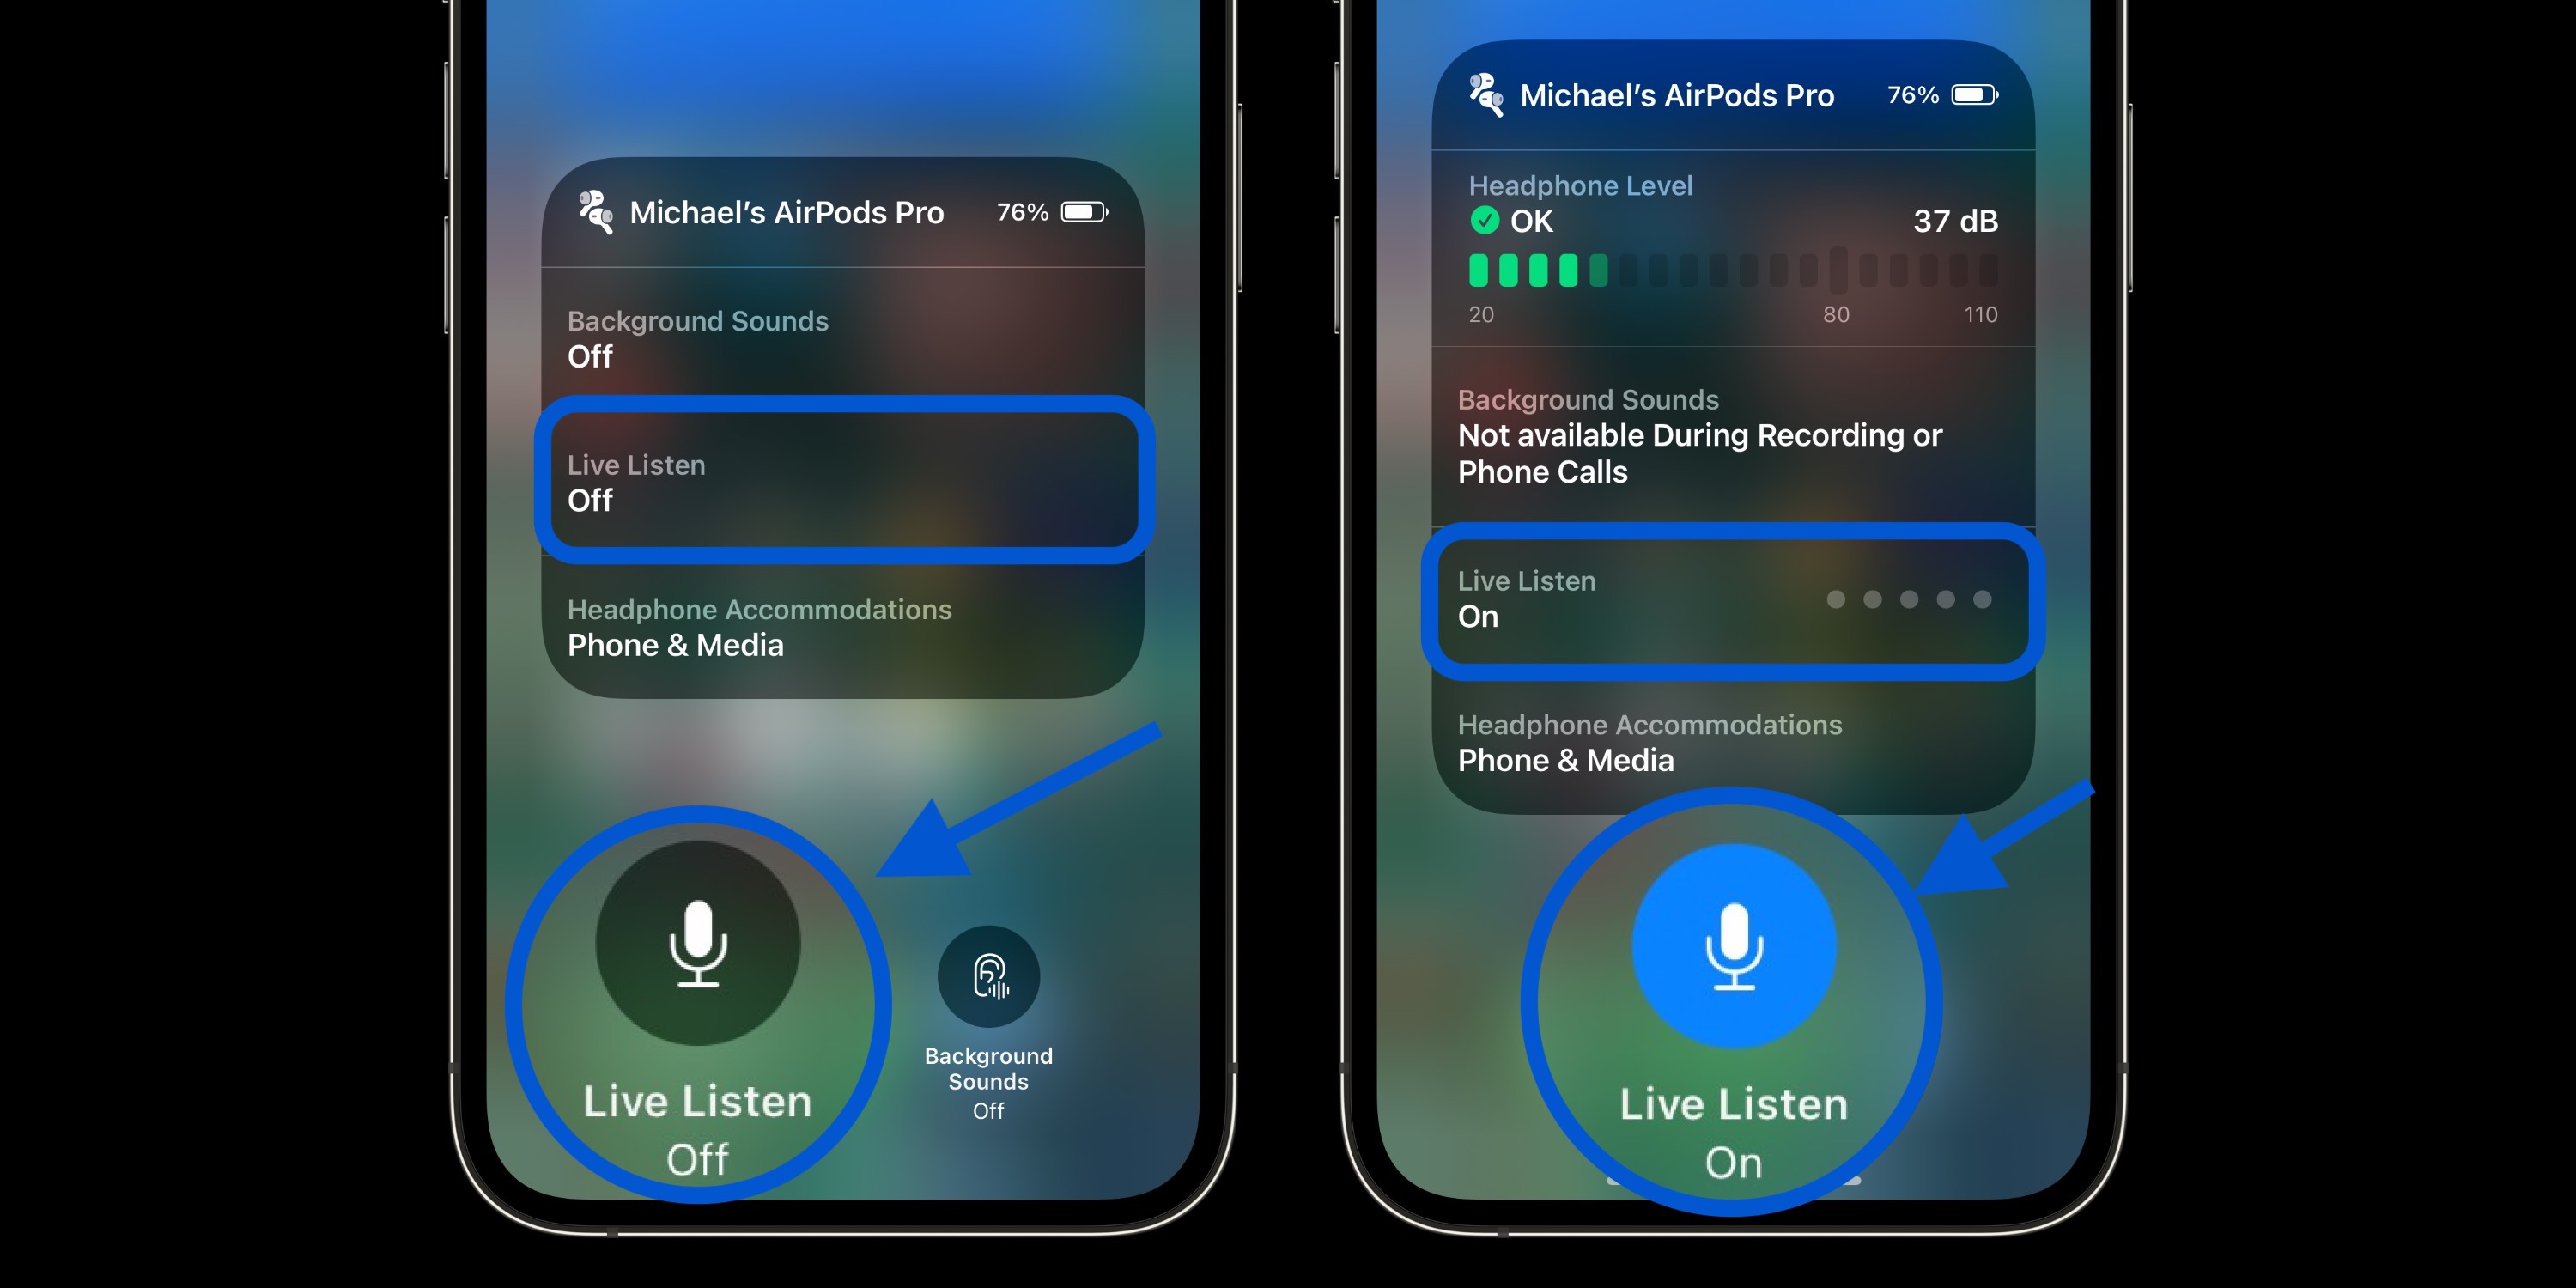 How to Check Decibel Level with iPhone and Apple Watch – Open Control Center on iPhone > Search for Ear Icon Tile > Faucet Hear Stay to Get Ambient Decibel Stage” class=”wp-image-788485″ srcset=”https://9to5mac.com/wp-content/uploads/websites/6/2022/02/decibel-levels-with-iphone-and-apple-watch-3.jpg 3000w, https://9to5mac.com/wp -content/uploads/websites/6/2022/02/decibel-levels-with-iphone-and-apple-watch-3.jpg?resize=155,78 155w, https://9to5mac.com/wp-content/ uploads/websites/6/2022/02/decibel-levels-with-iphone-and-apple-watch-3.jpg?resize=655328 655w, https://9to5mac.com/wp-content/uploads/websites/6 /2022/02/decibel-levels-with-iphone-and-apple-watch-3.jpg?resize=768,384 768w, https://9to5mac.com/wp-content/uploads/websites/6/2022/02/ decibel-levels-with-iphone-and-apple-watch-3.jpg?resize=1024,512 1024w, https://9to5mac.com/wp-content/uploads/websites/6/2022/02/decibel-levels -with-iphone-and-apple-watch-3.jpg?resize=1536,768 1536w, https://9to5mac.com/wp-content/uploads/websites/6/2022/02/decibel-levels-with- iphone-and-apple-watch-3.jpg?resize=2048,1024 2048w, https://9to5mac.com/wp-content/uploads/websites/6/2022/02/decibel-levels-with-iphone-and -apple-watch-3.jpg?resize=350175 350w, https://  9to5mac.com/wp-content/uploads/websites/6/2022/02/decibel-levels-with-iphone-and-apple-watch-3.jpg?resize=1600,800 1600w, https://9to5mac.com /wp-content/uploads/websites/6/2022/02/decibel-levels-with-iphone-and-apple-watch-3.jpg?resize=290,145 290w, https://9to5mac.com/wp-content/ uploads/websites/6/2022/02/decibel-levels-with-iphone-and-apple-watch-3.jpg?resize=150,75 150w” sizes=”(max-width: 3000px) 100vw, 3000px”,</figure>
<ul>
<li>Lastly, you may test your listening historical past at each ambient and headphone decibel ranges <strong><em>well being app</em></strong>
<ul>
<li>faucet <strong><em>browse tab</em></strong>    on the underside</li>
<li>select now <strong><em>the listening to</em></strong></li>
</ul>
</li>
</ul>
<figure class=